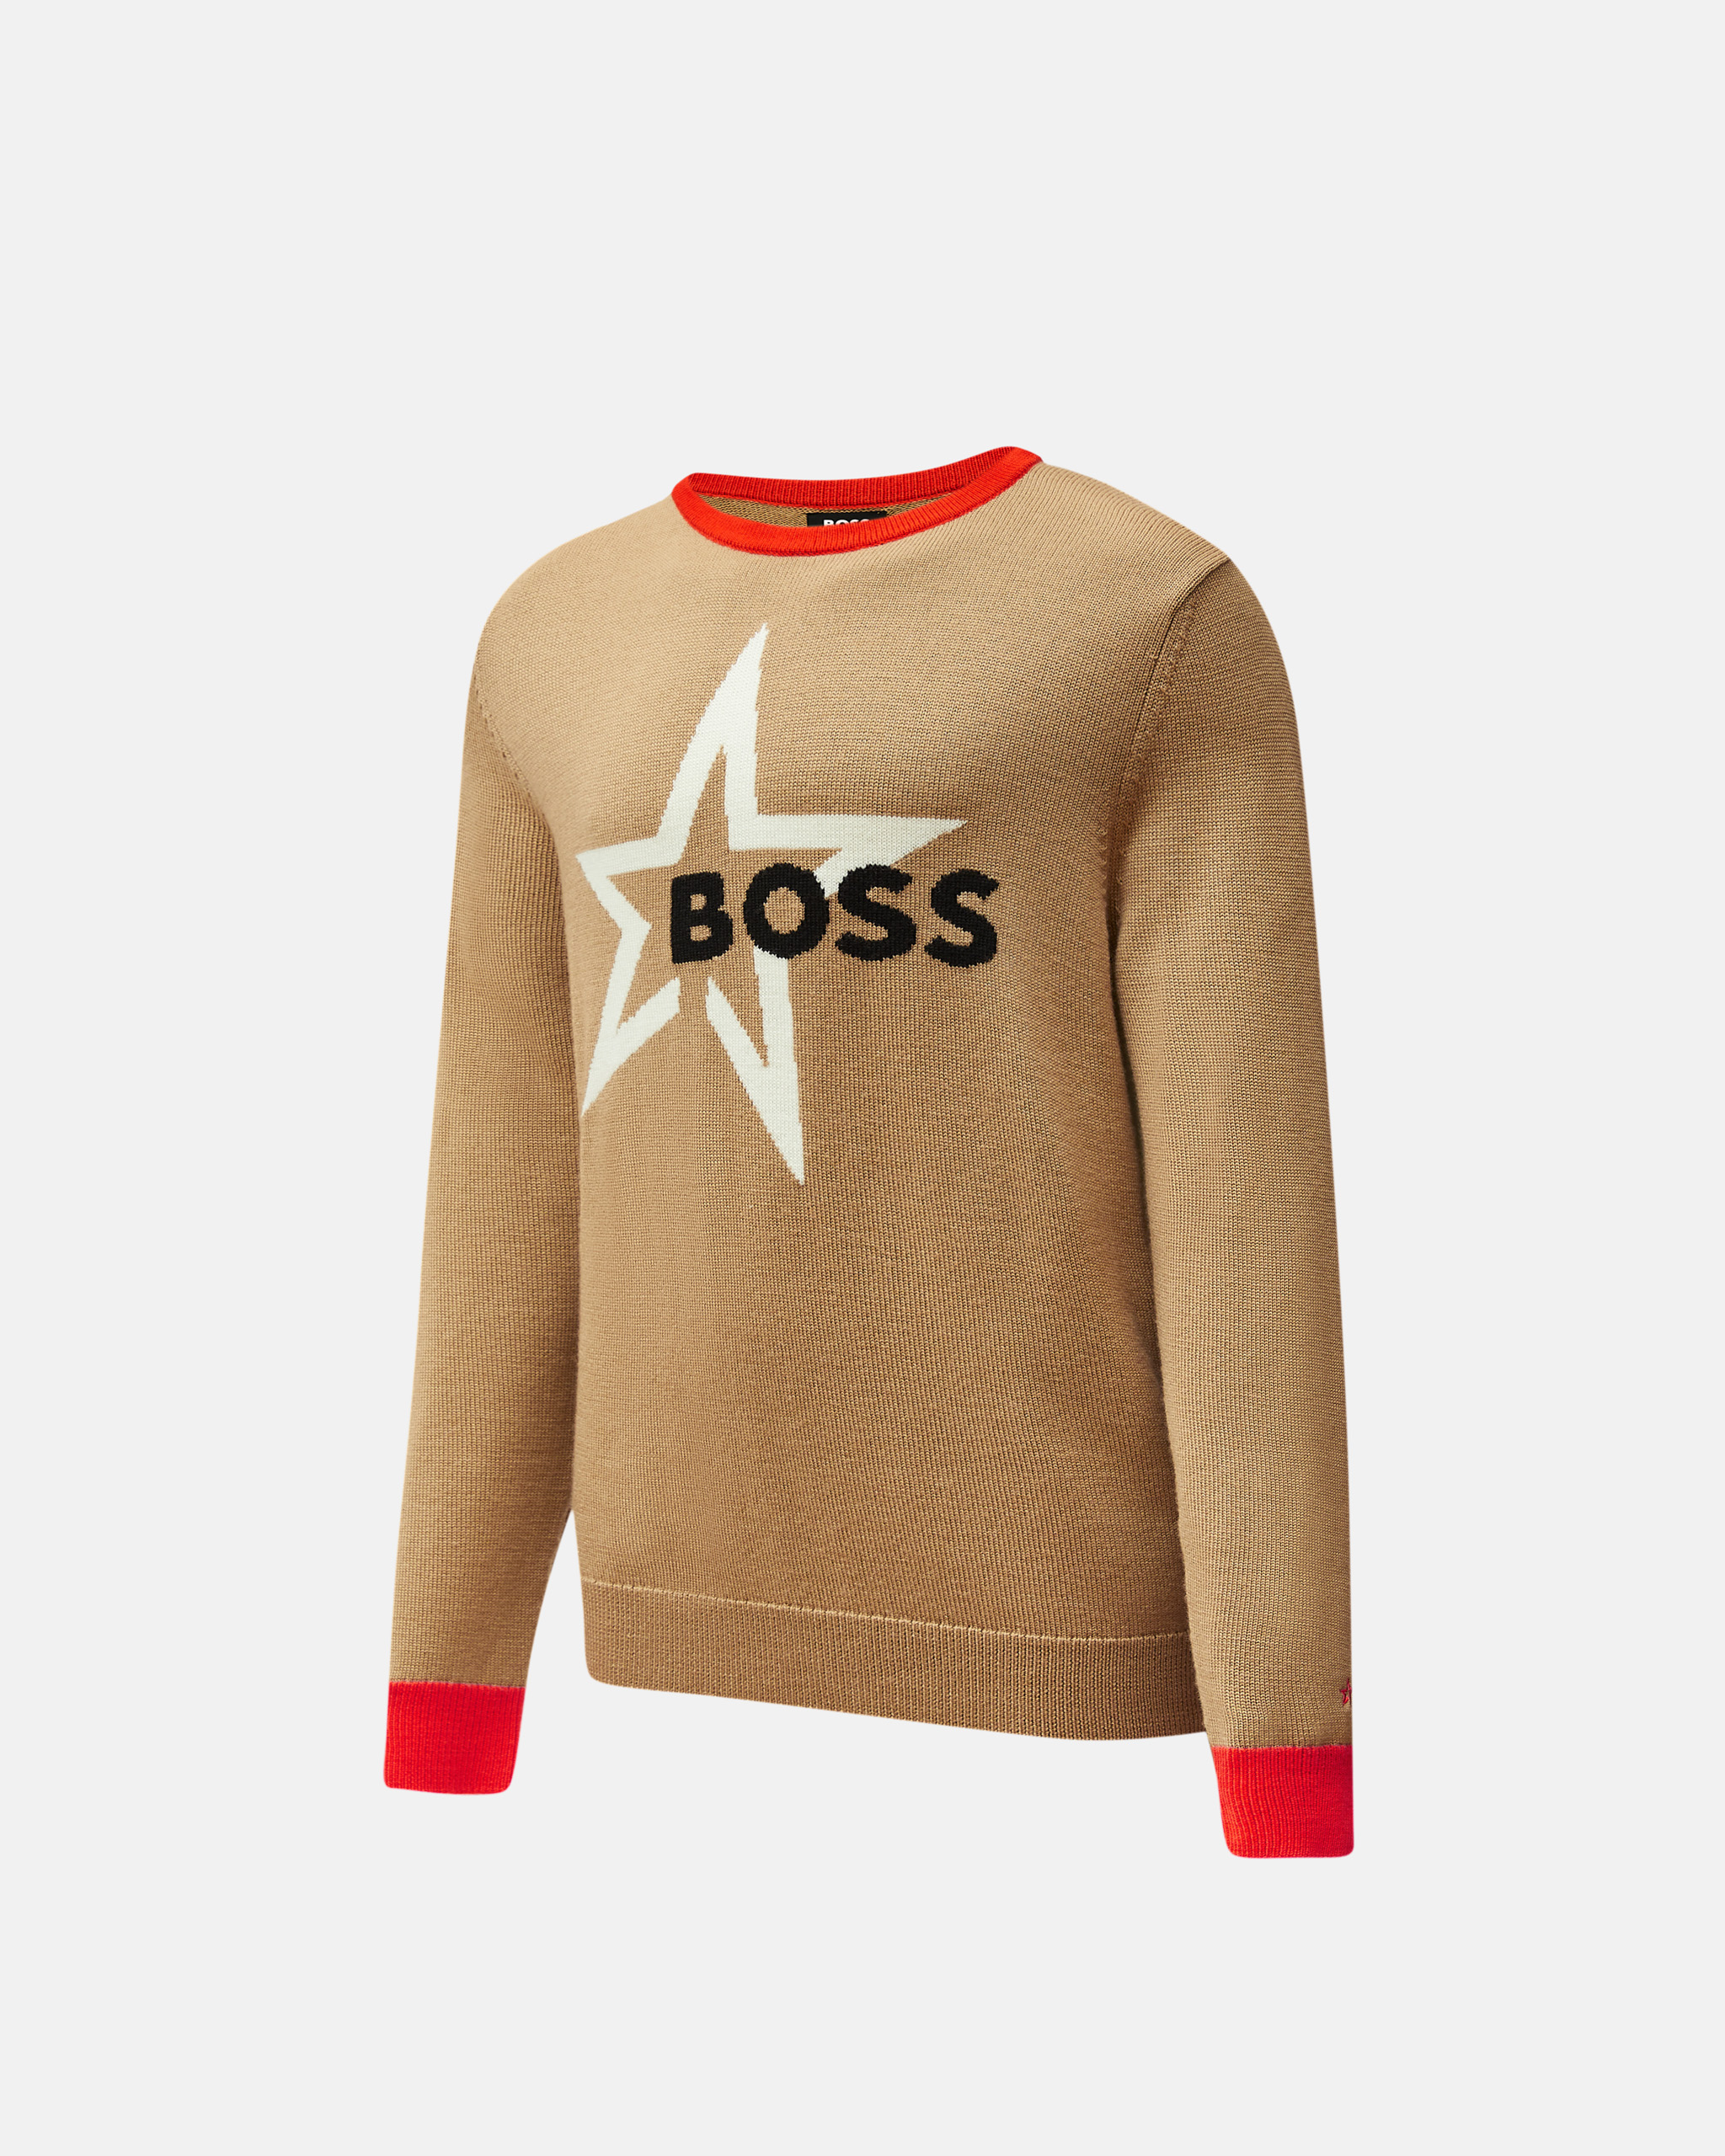 Perfect Moment Pm Boss Piste Merino Wool Sweater In Brown